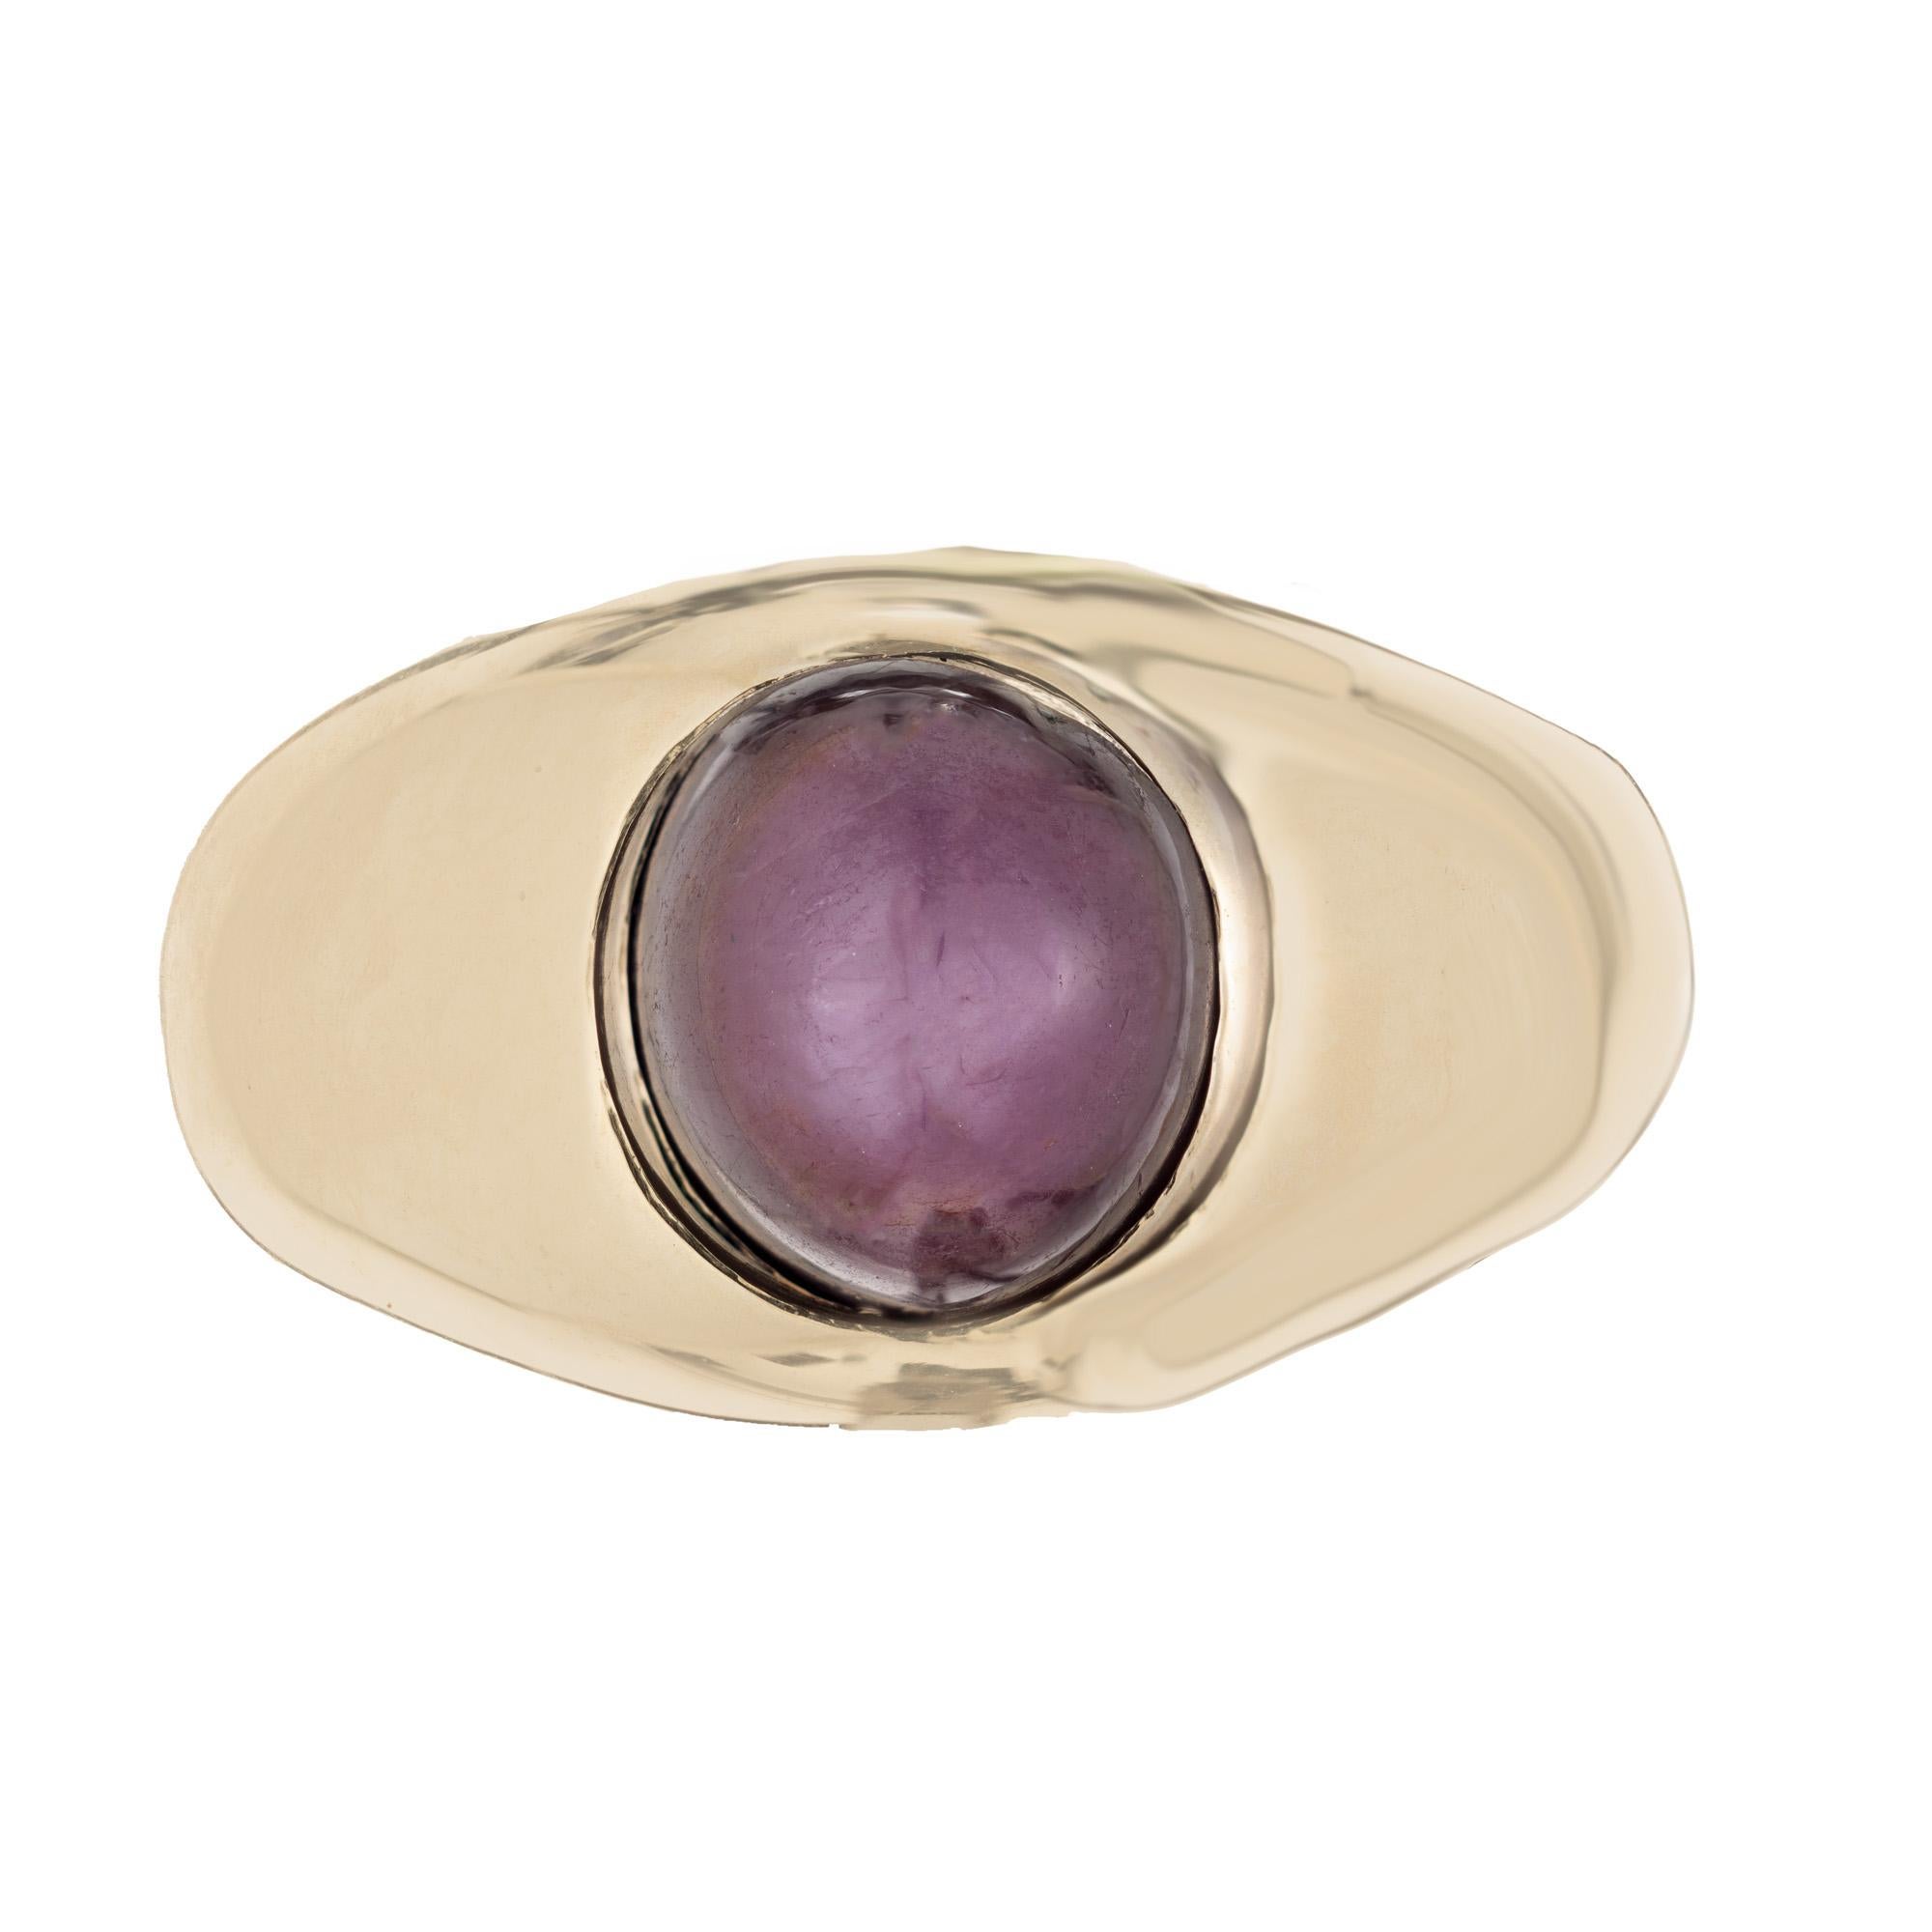 1960's Star Cabochon Ruby yellow gold men's Ring. The center piece of the ring is an oval shaped 5.10ct star ruby. The ruby is rich and deep in color and warmth with the star being visible in lighting and movement. The stone is meticulously set in a